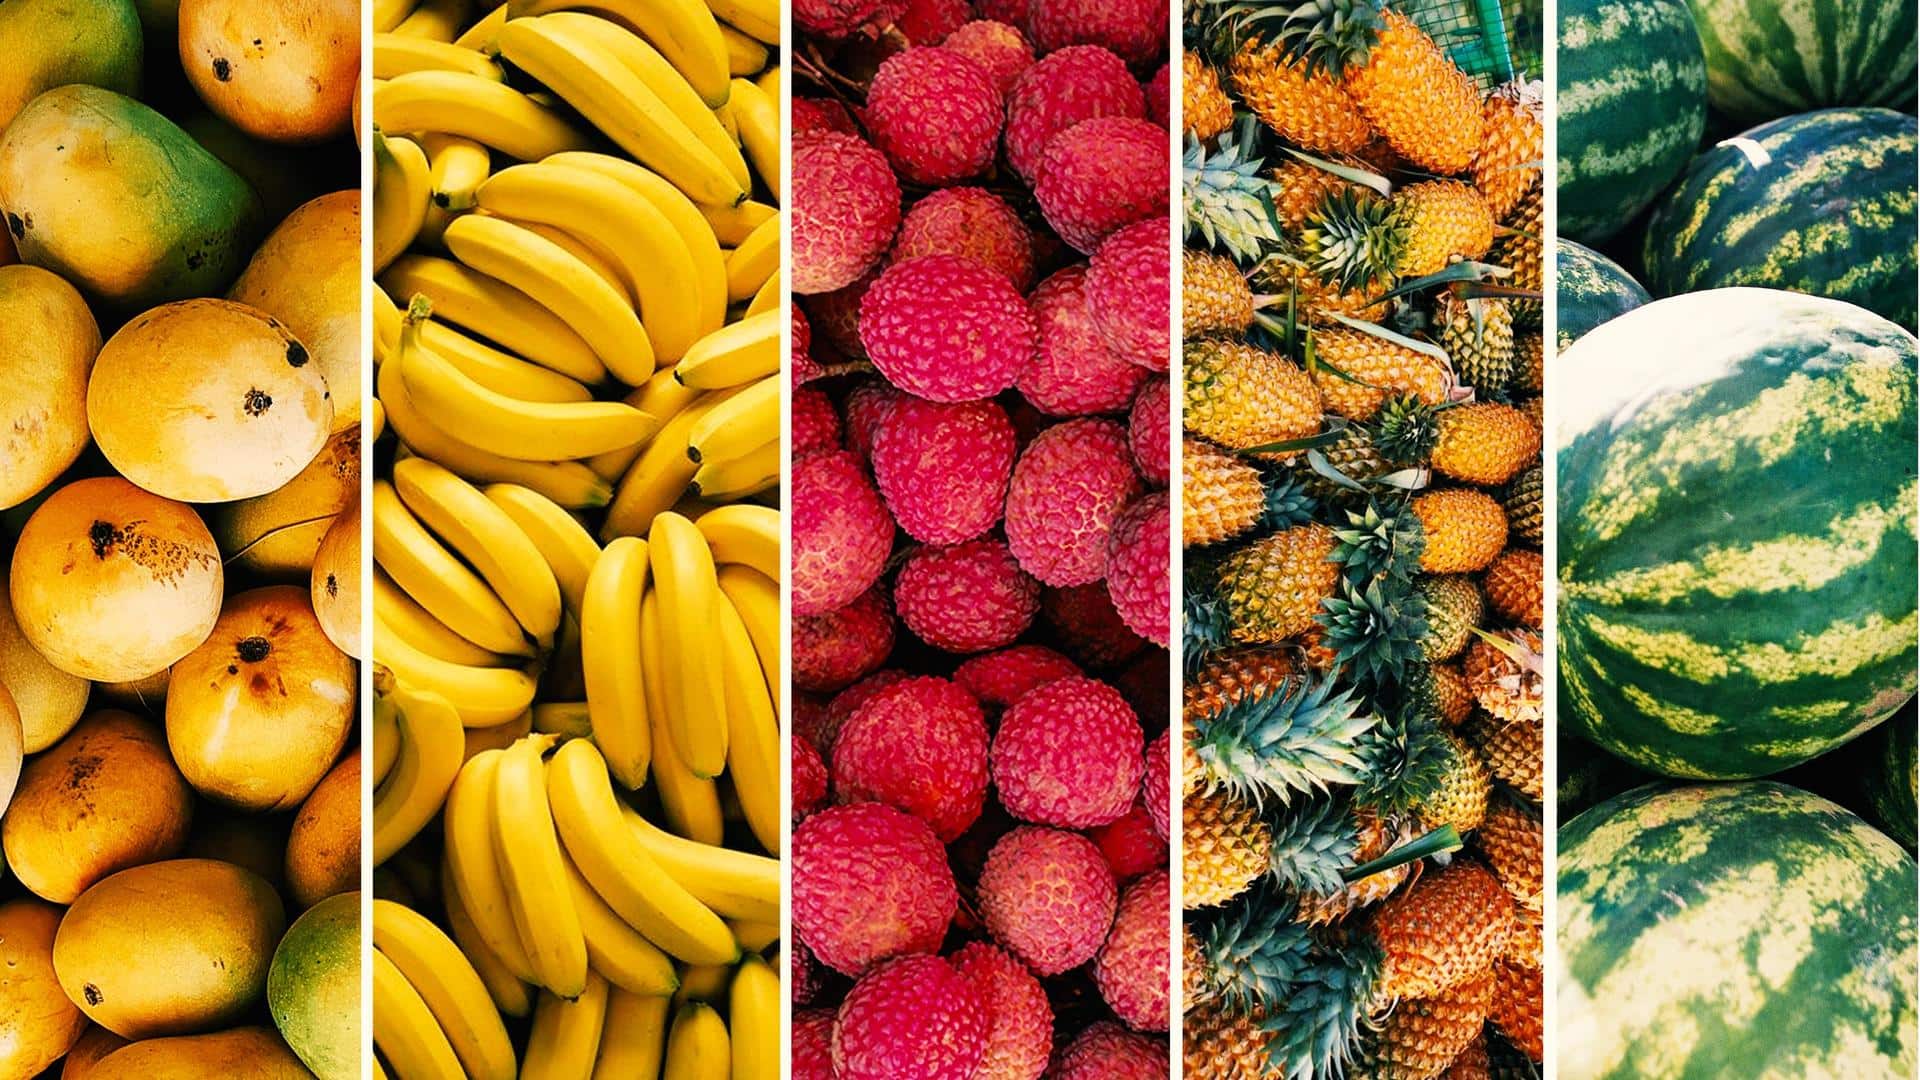 These are the worst fruits for someone with diabetes